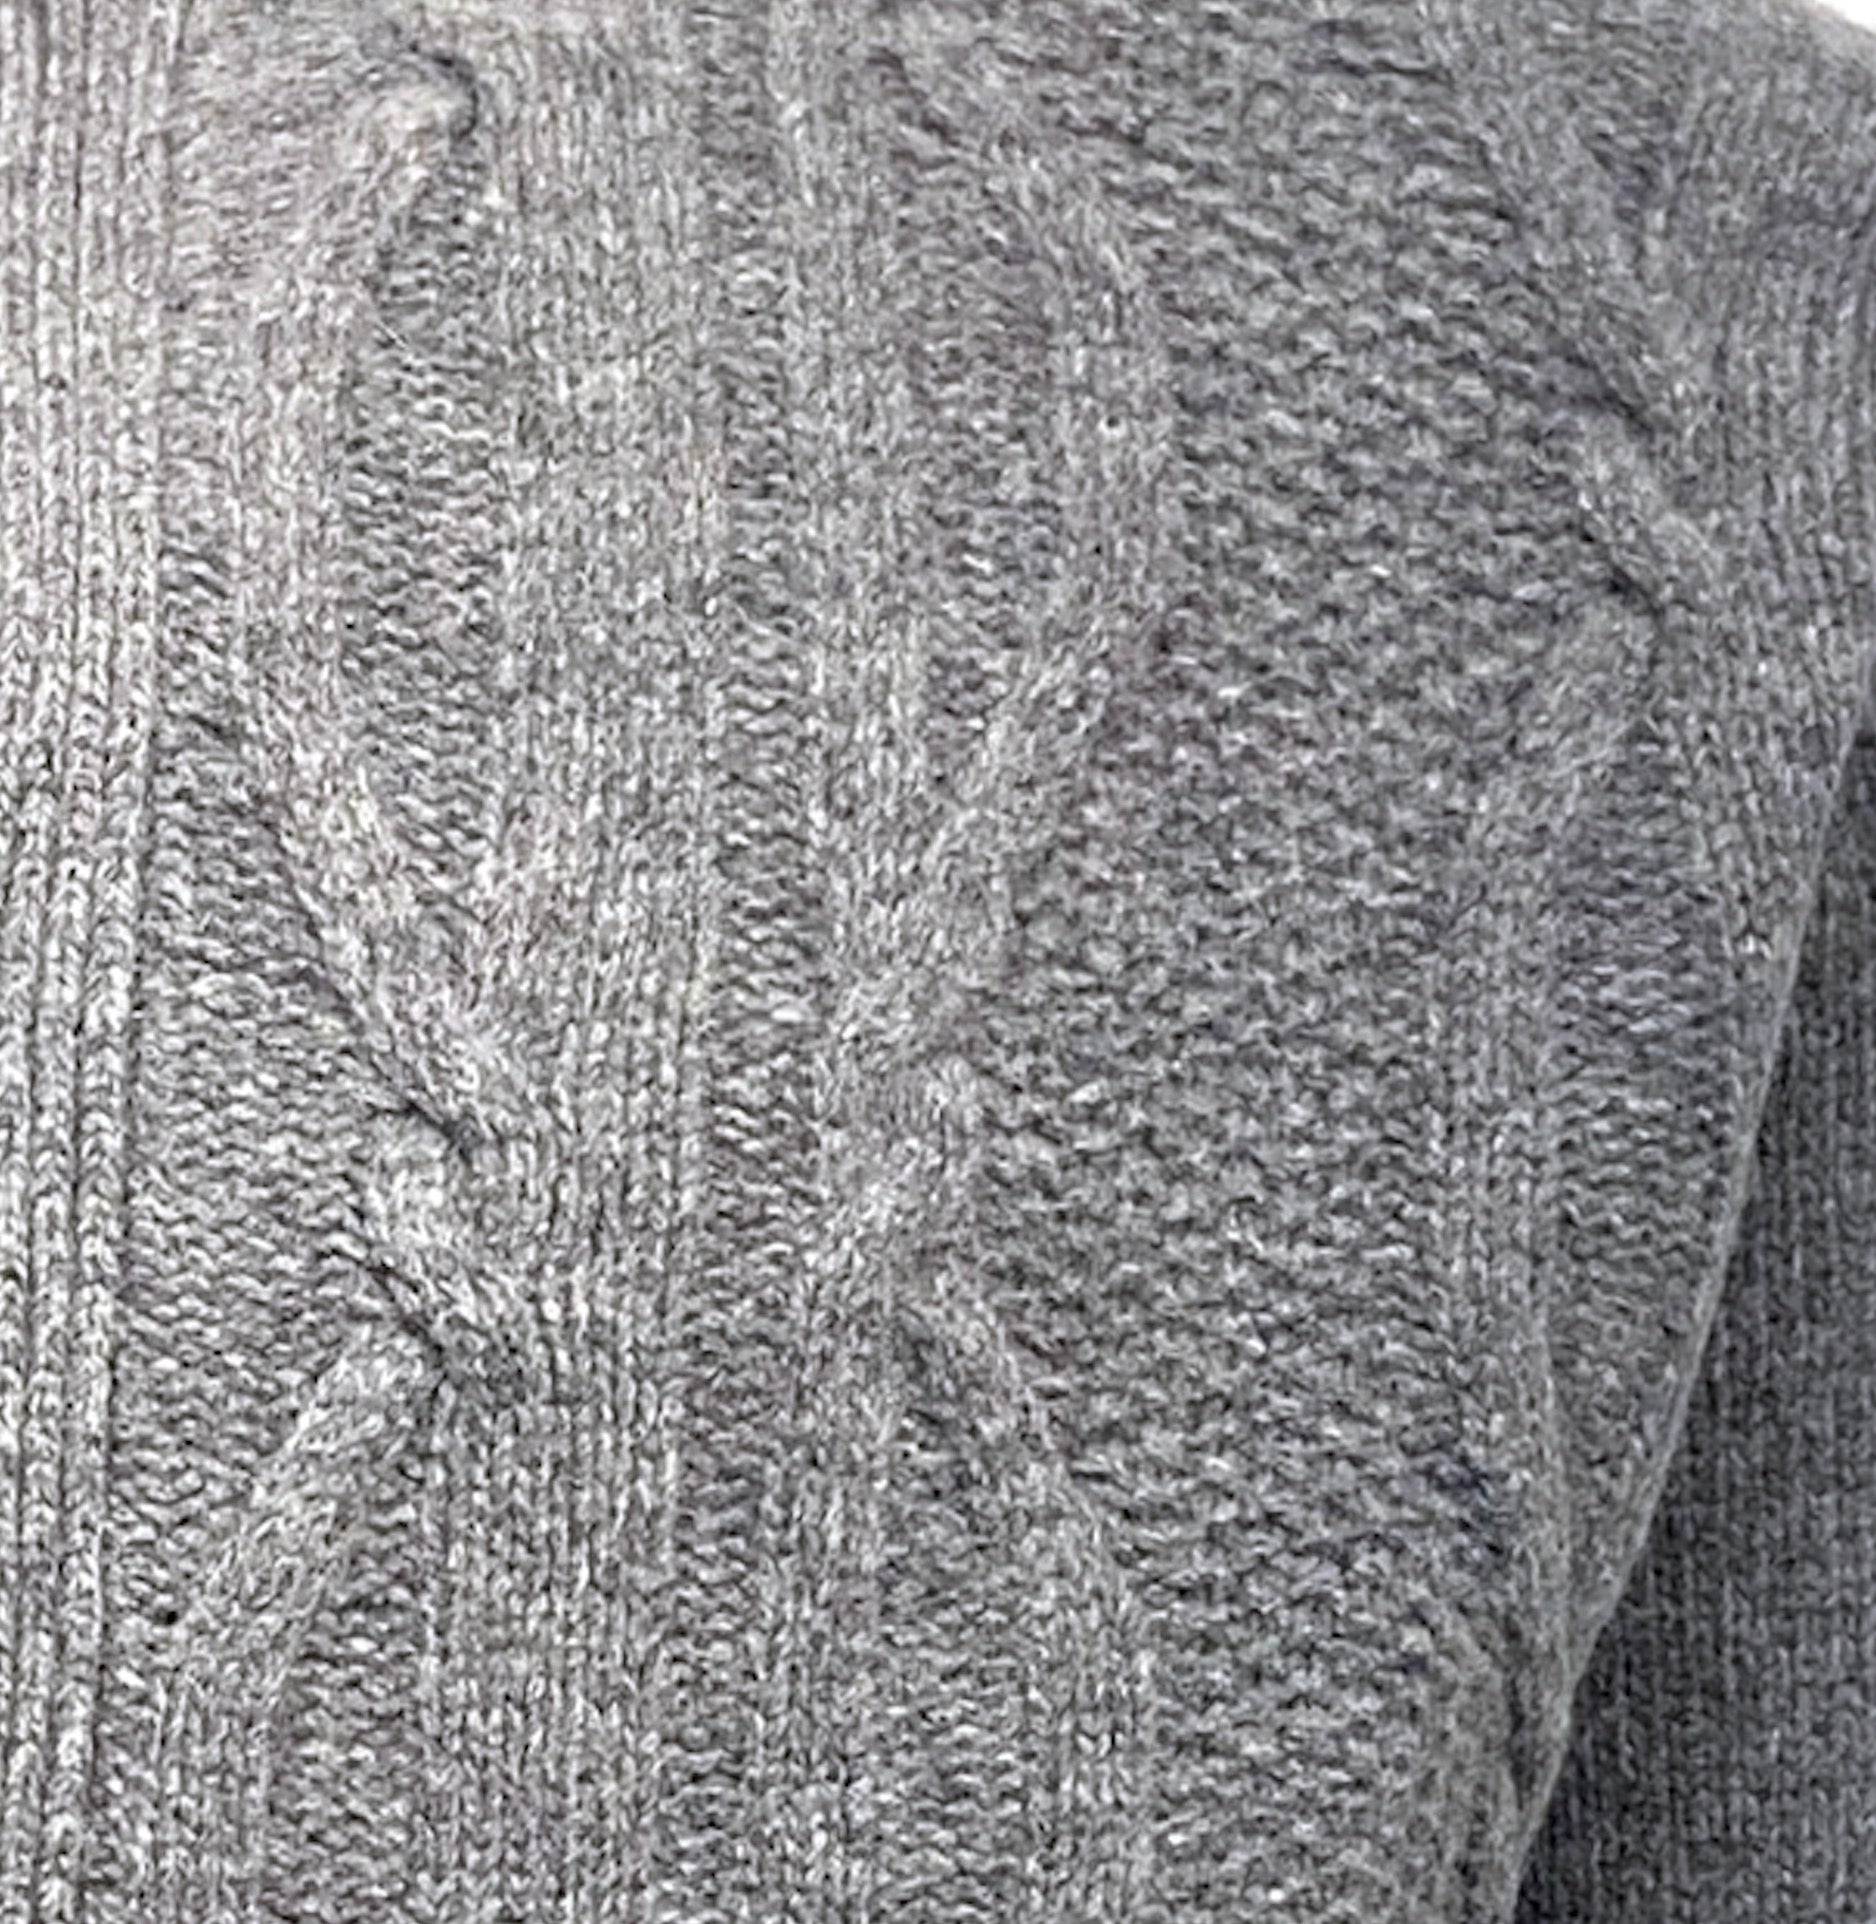 Italian-Made Wool Blend Cable Knit Button Cardigan Sweater in Grey by Viyella